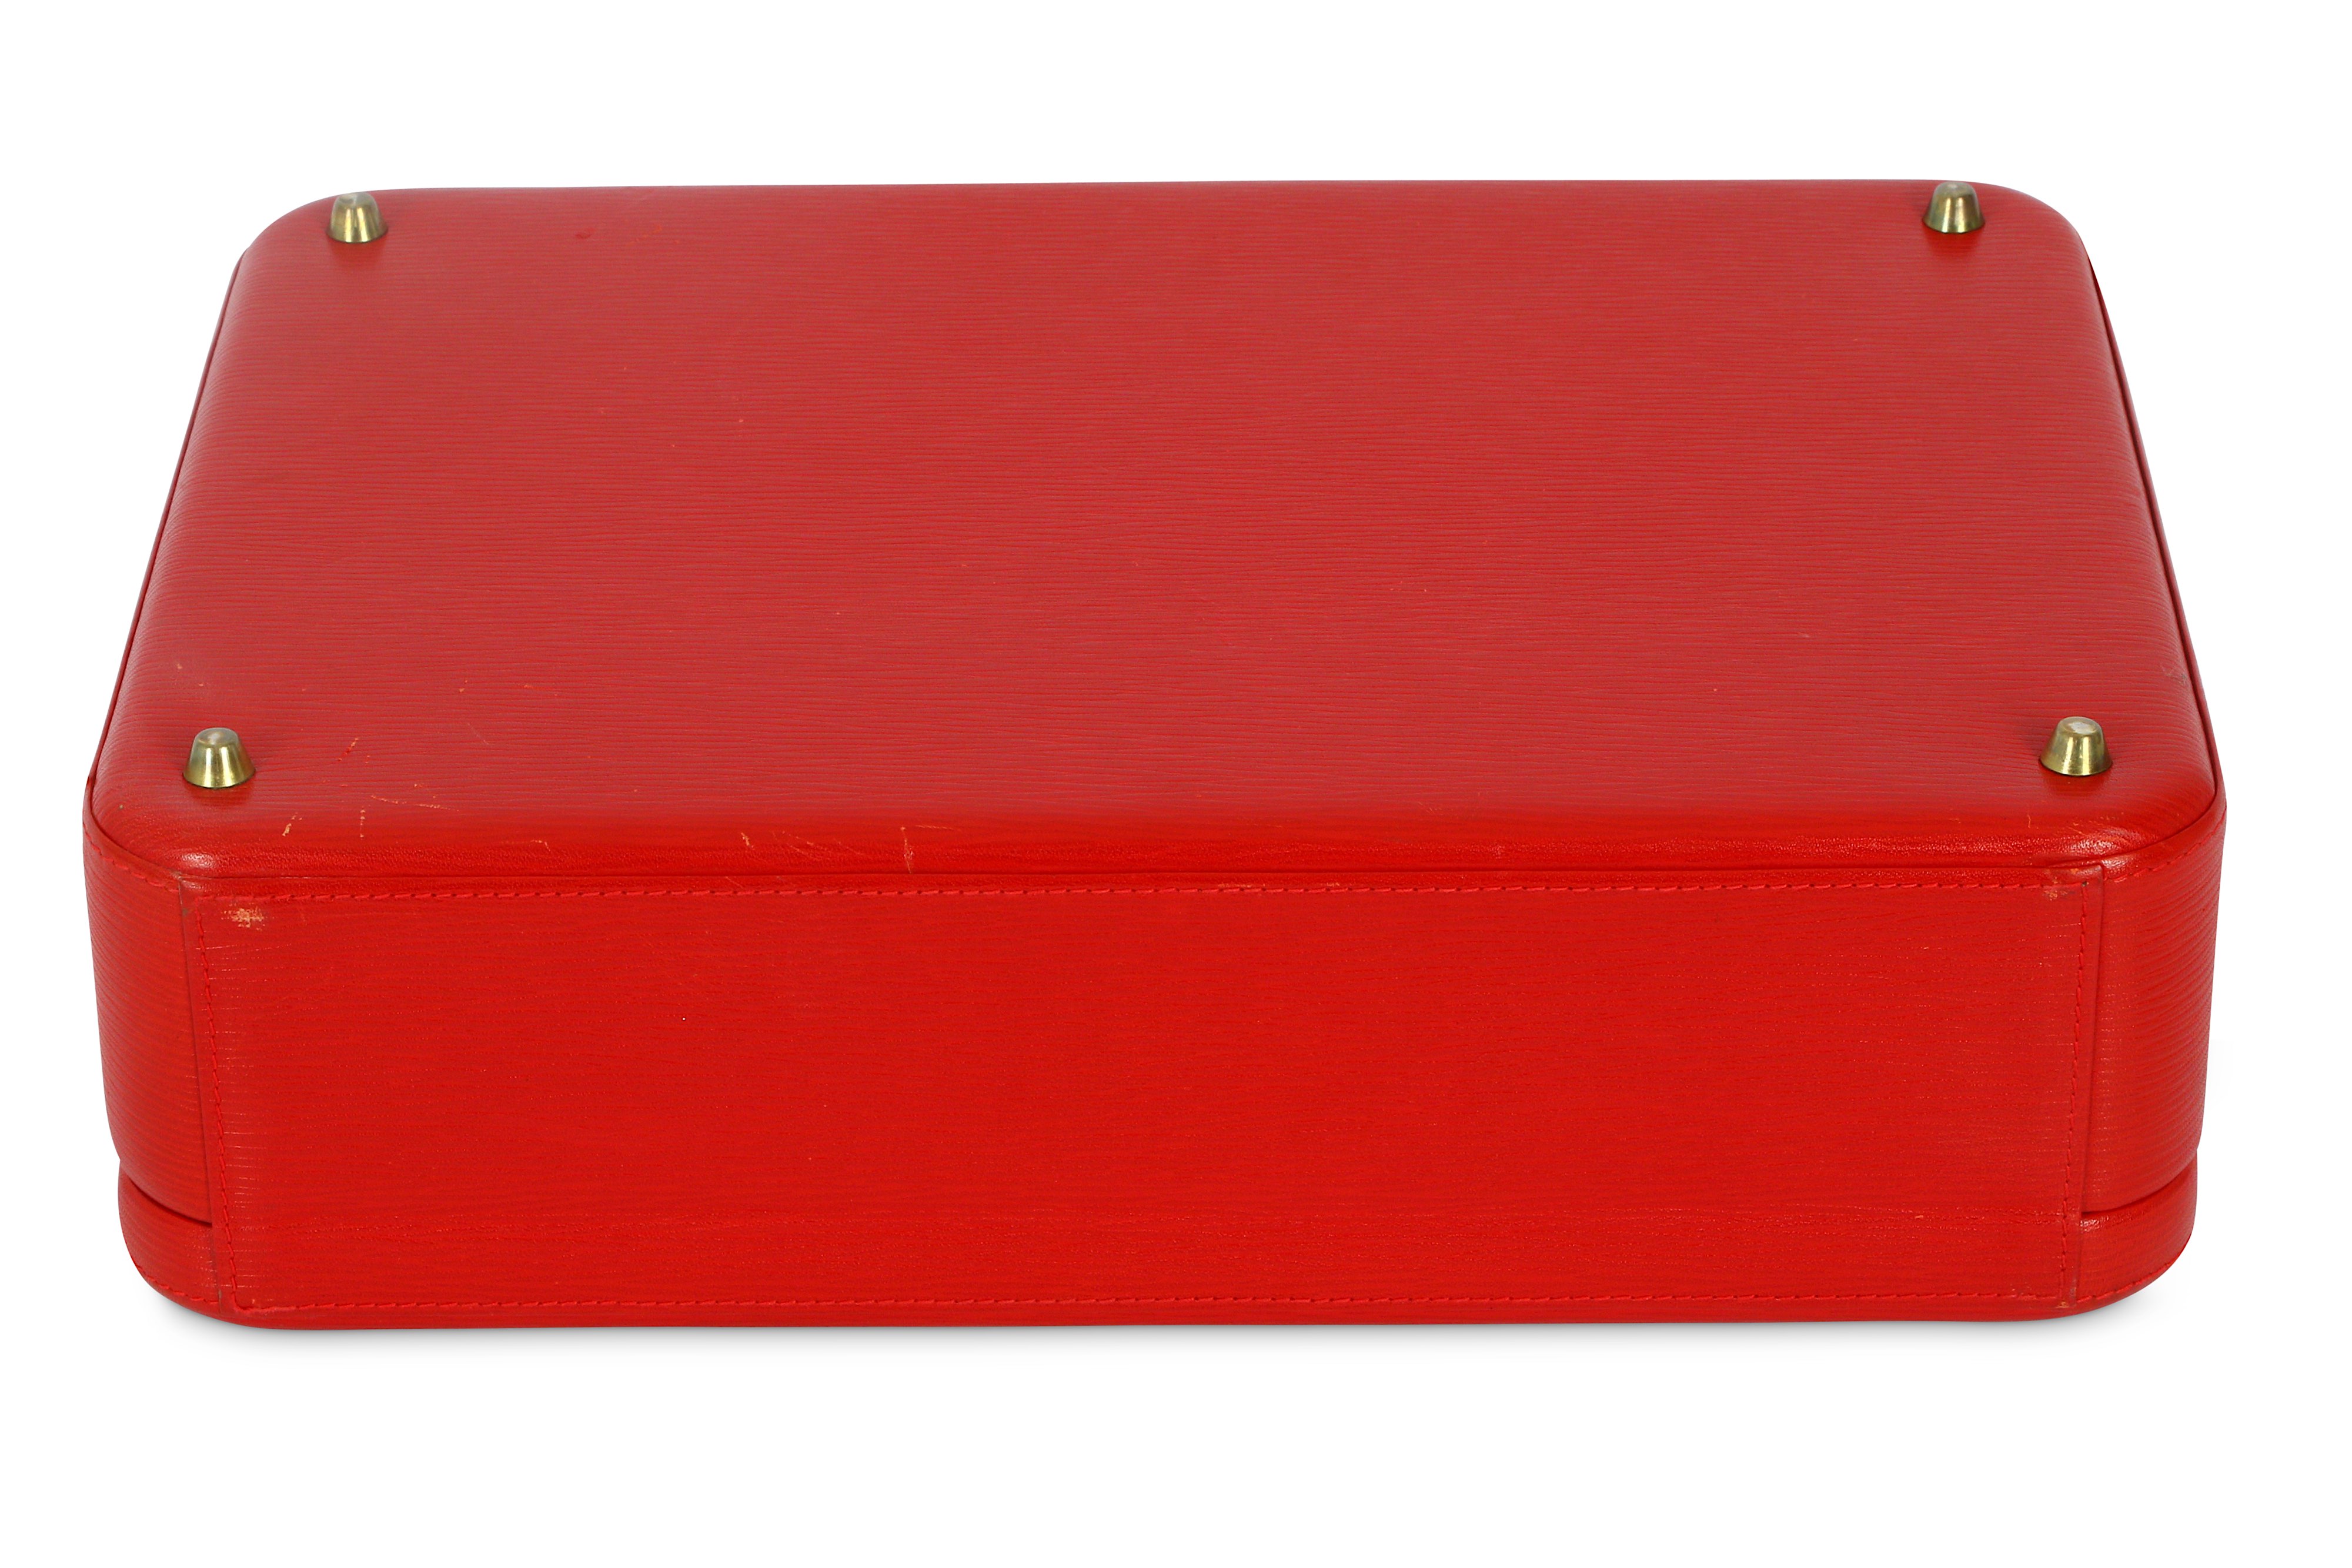 Asprey Red Leather Jewellery Case - Image 6 of 7